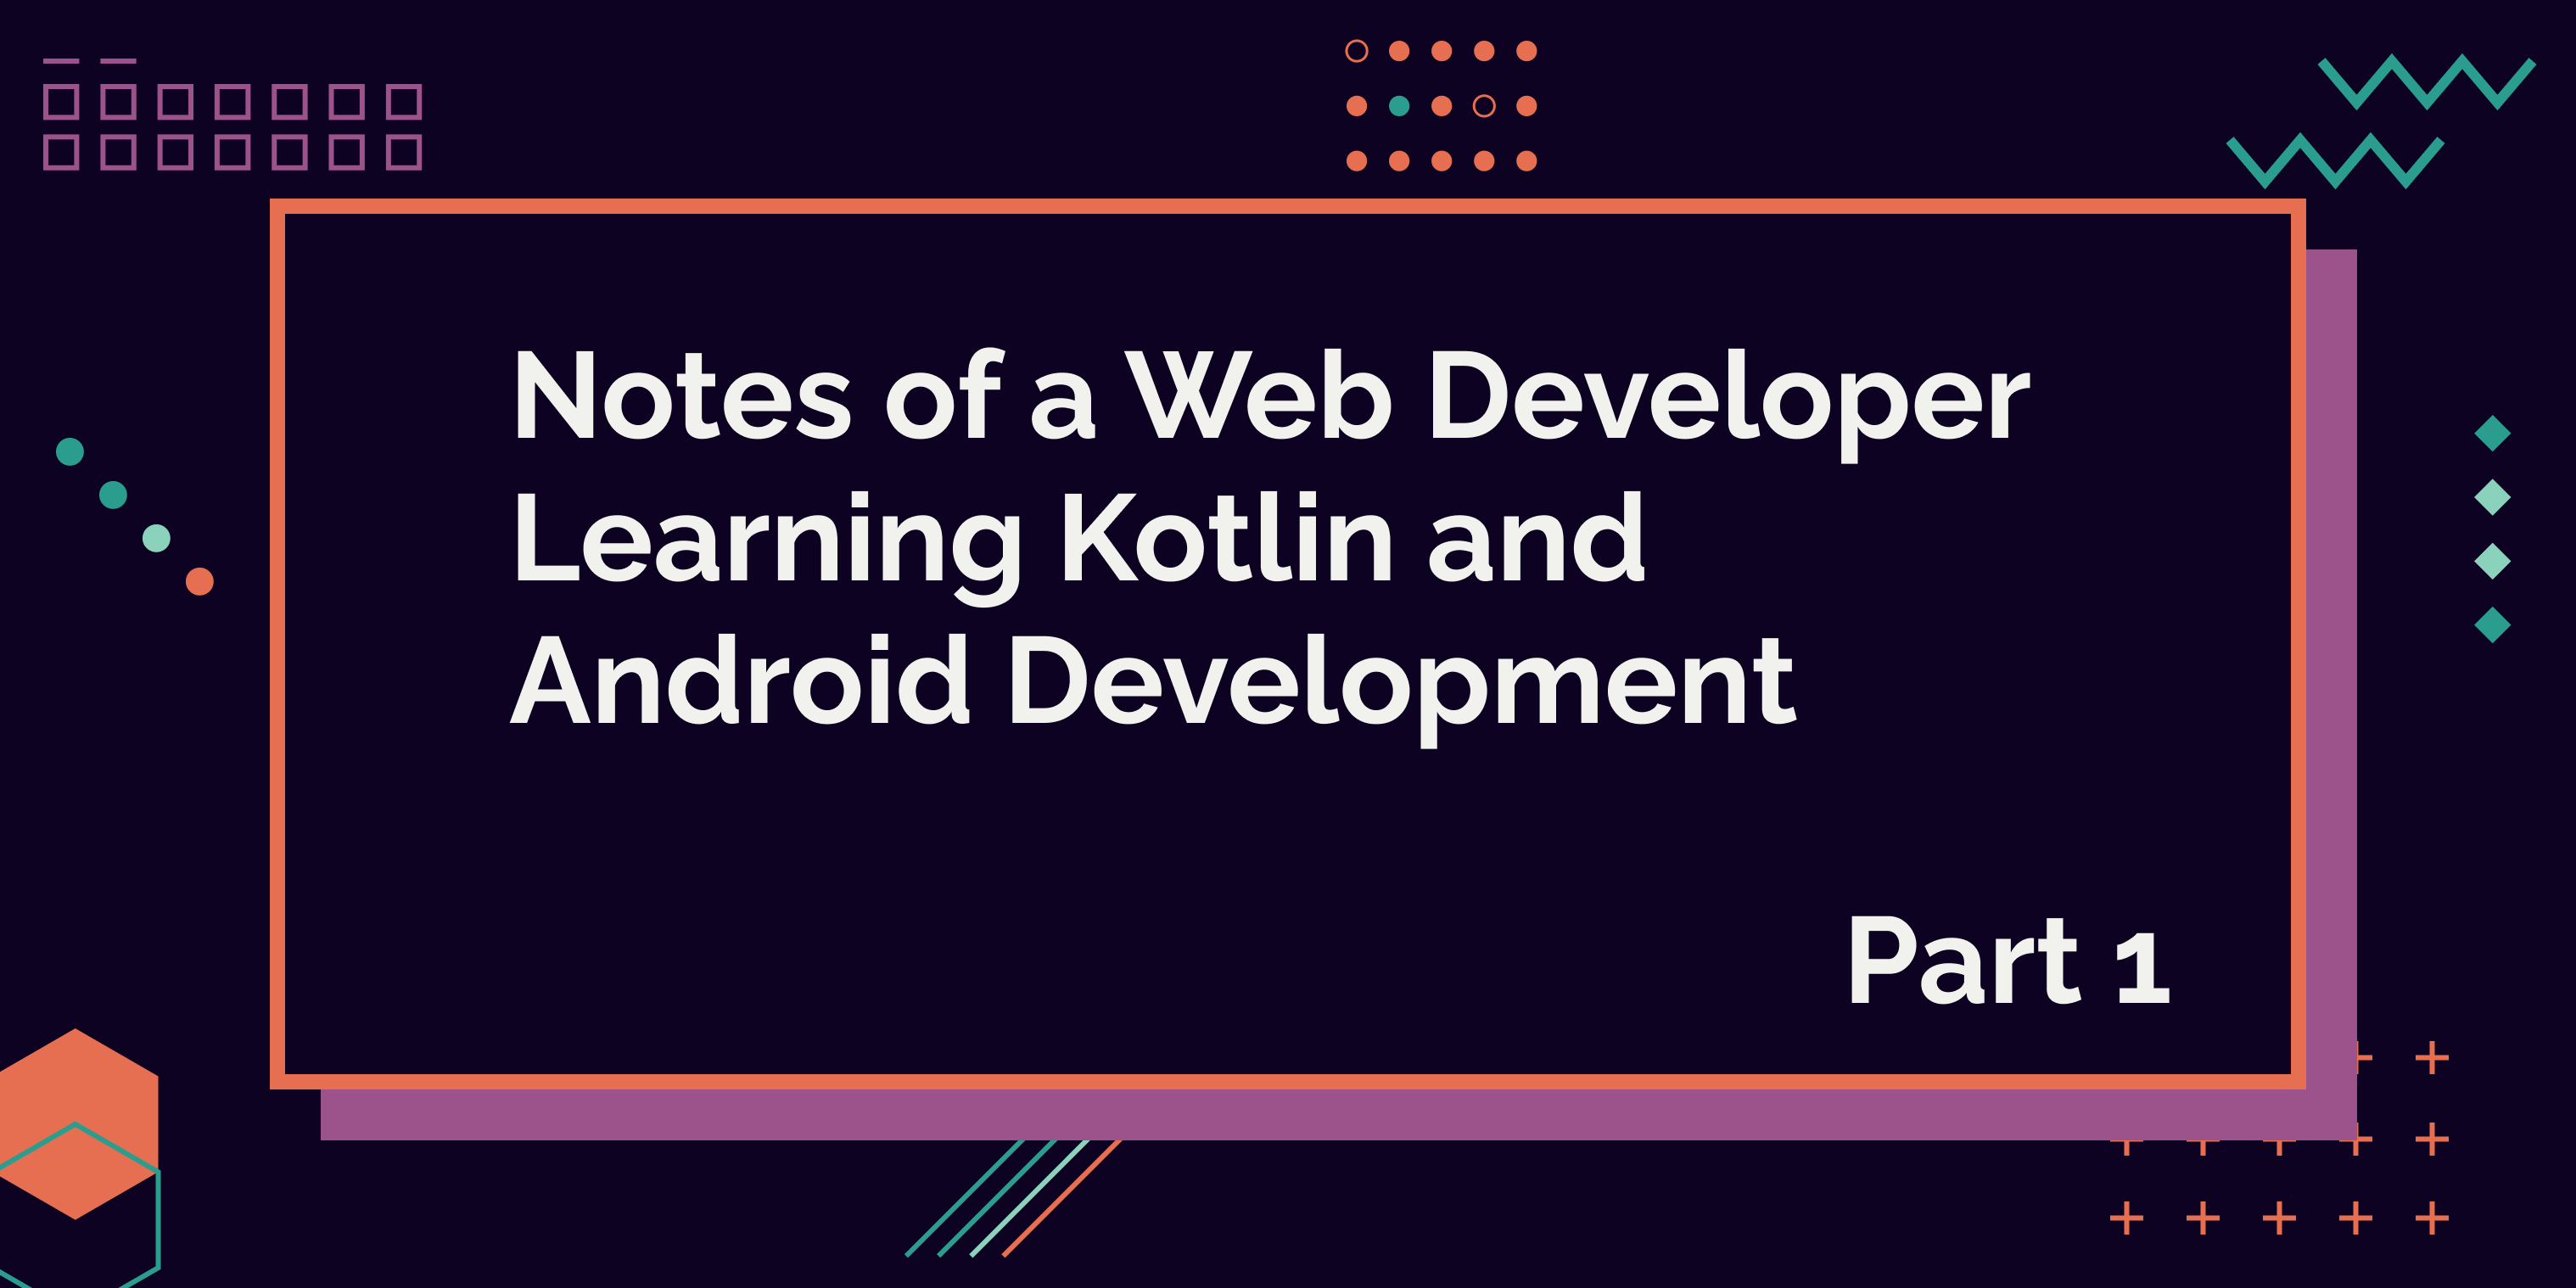 Notes of a Web Developer Learning Kotlin and Android Development - part 1.